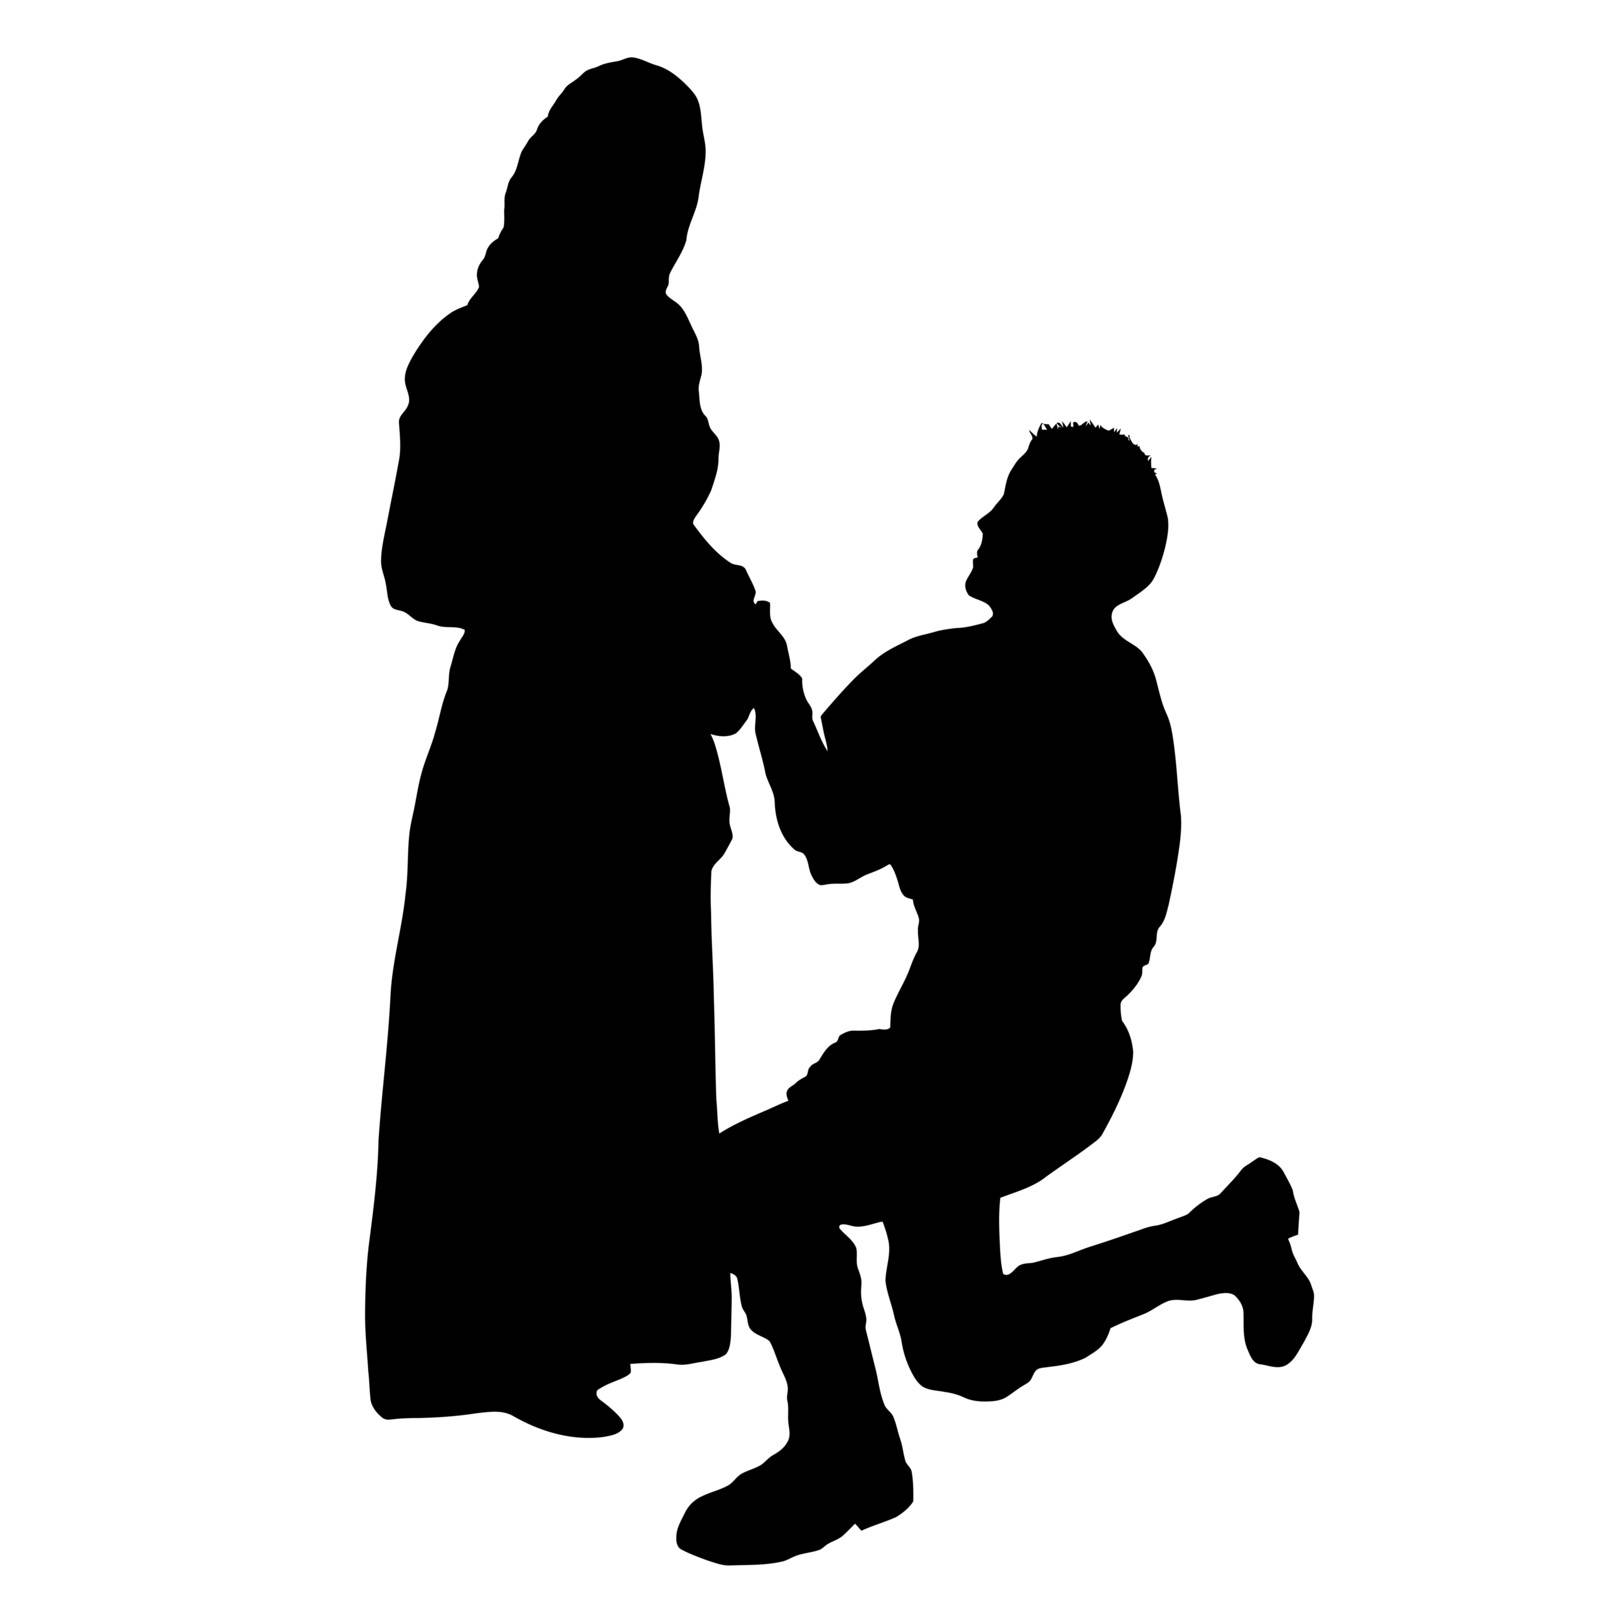 A man on his knees, makes a proposal to marry the girl , black silhouette on white background, vector illustration